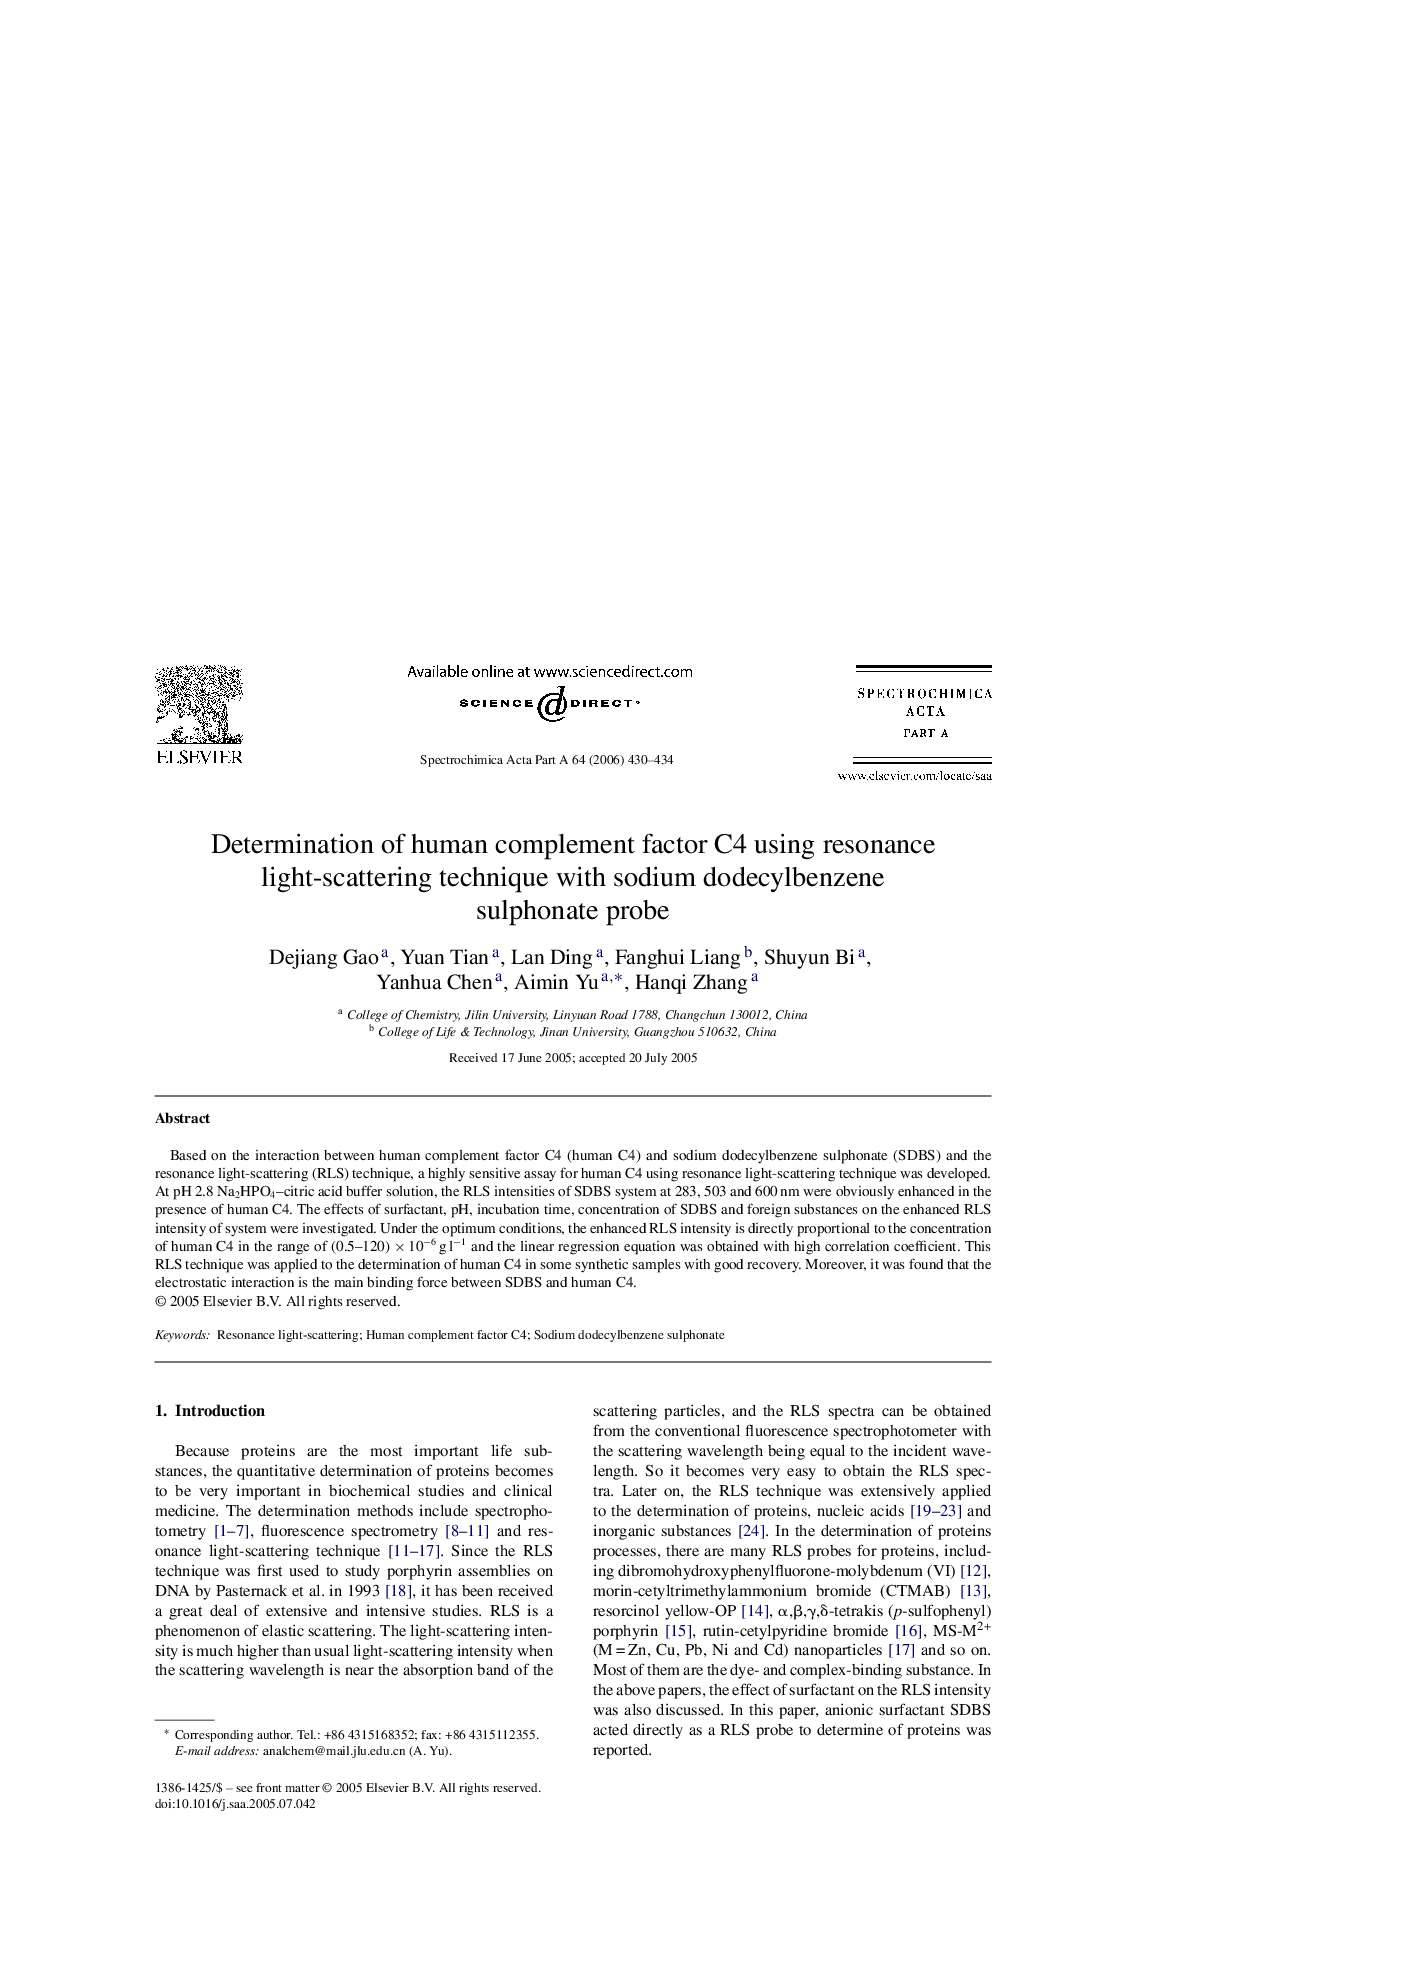 Determination of human complement factor C4 using resonance light-scattering technique with sodium dodecylbenzene sulphonate probe